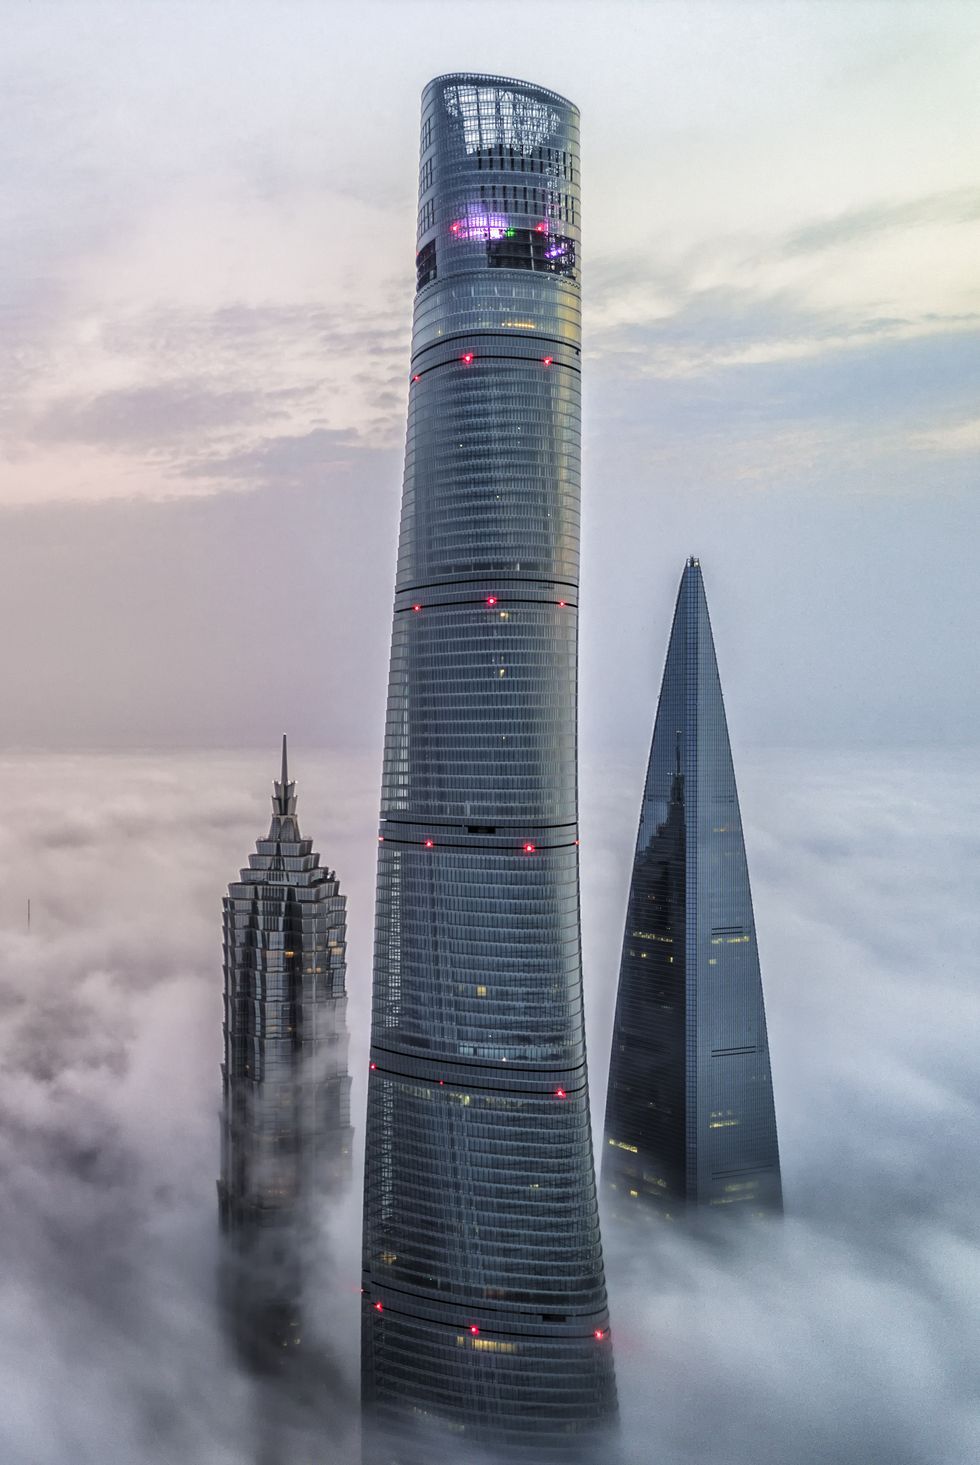 Shanghai Tower: Influences on Design - Urban Planning and Design -  architecture and design